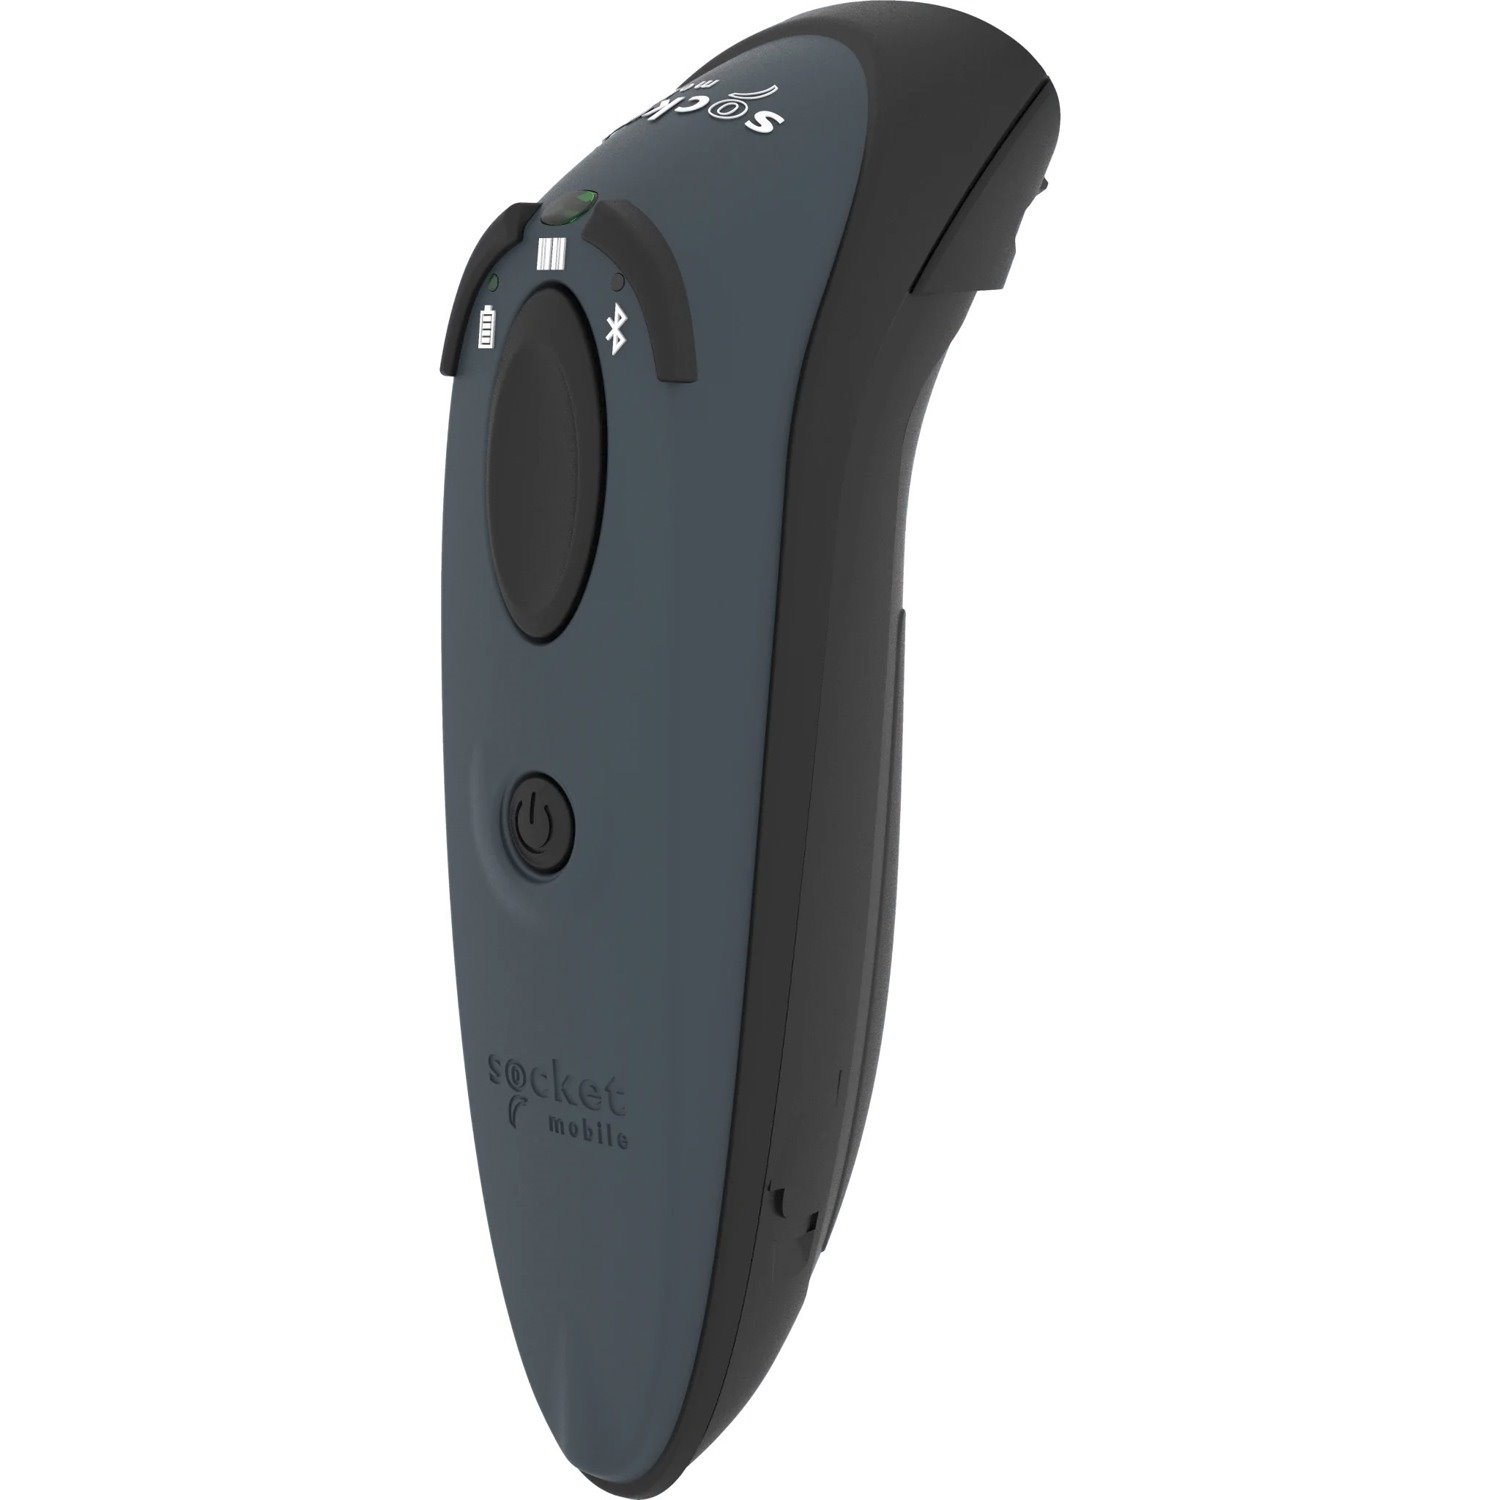 Socket Mobile DuraScan D720 Rugged Retail, Transportation, Warehouse, Manufacturing, Field Sales/Service, Healthcare, Asset Tracking Handheld Barcode Scanner - Wireless Connectivity - Grey - USB Cable Included